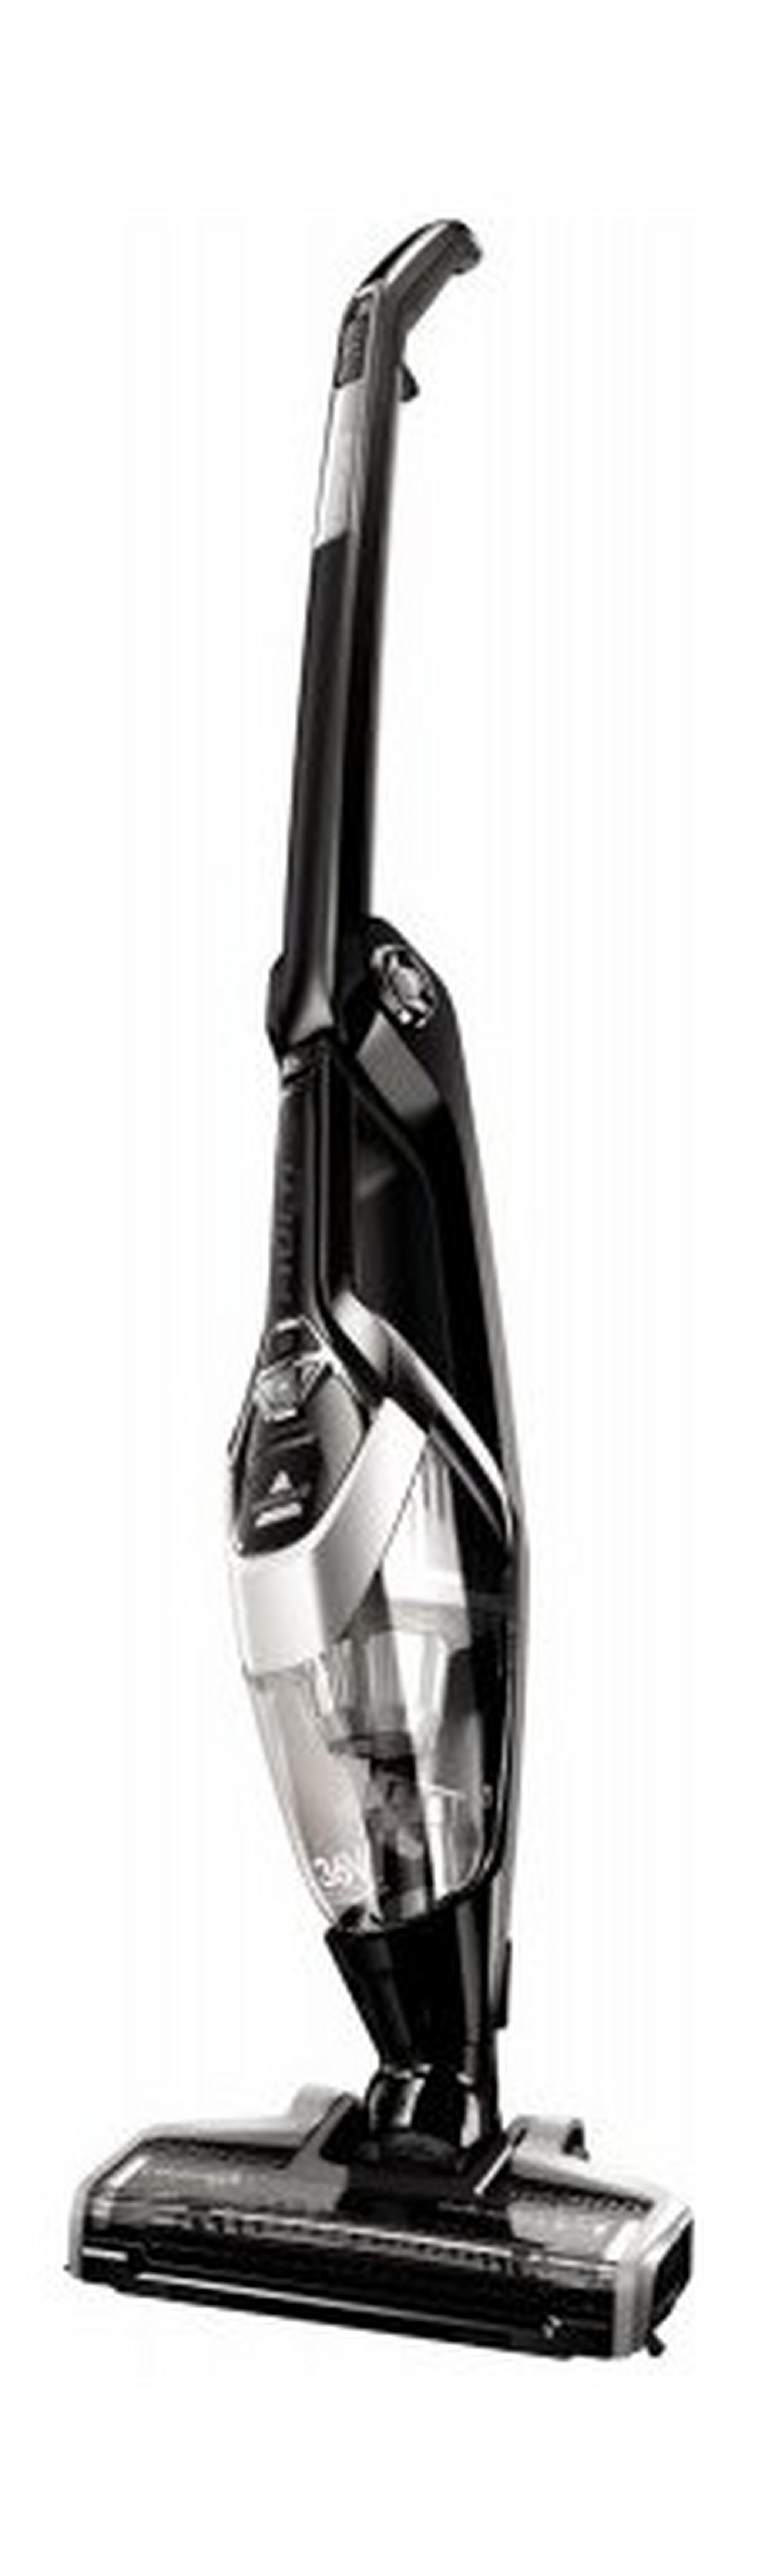 Bissell Multireach ION XL 36V 2 in 1 Lightweight Cordless Vacuum Cleaner